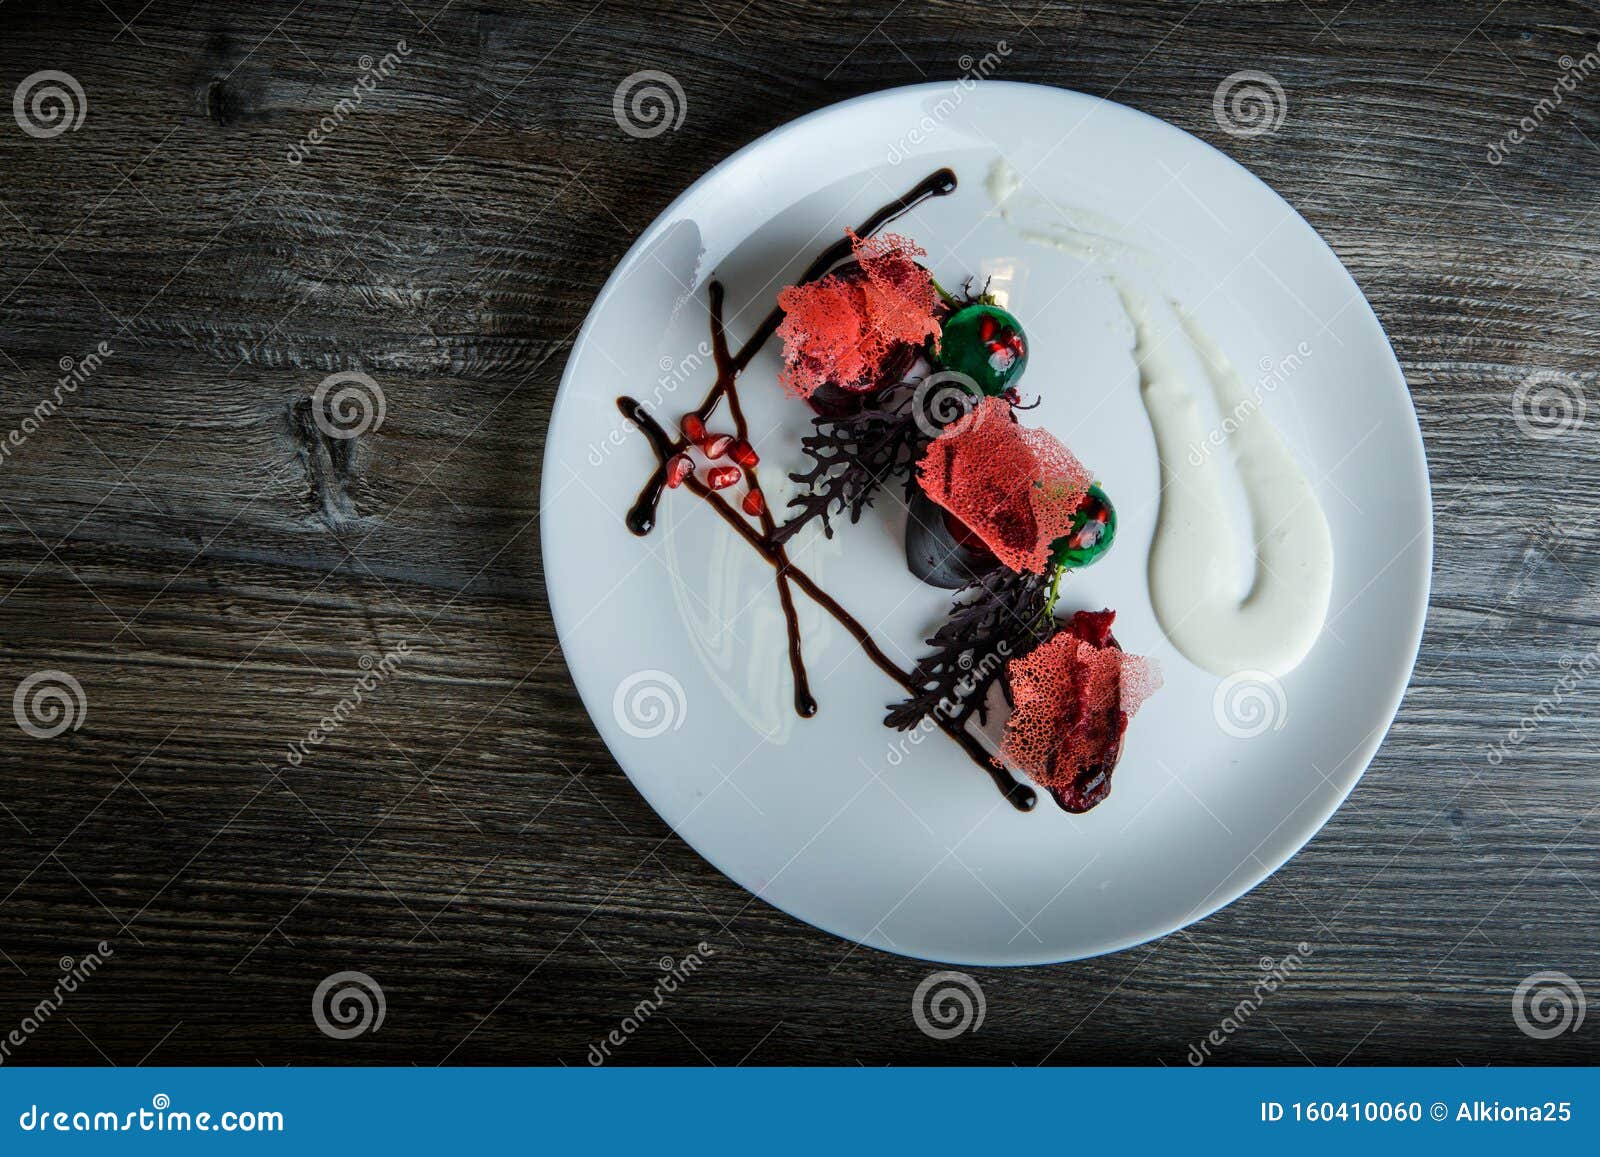 2 026 Fine Dining Plate Dessert Photos Free Royalty Free Stock Photos From Dreamstime